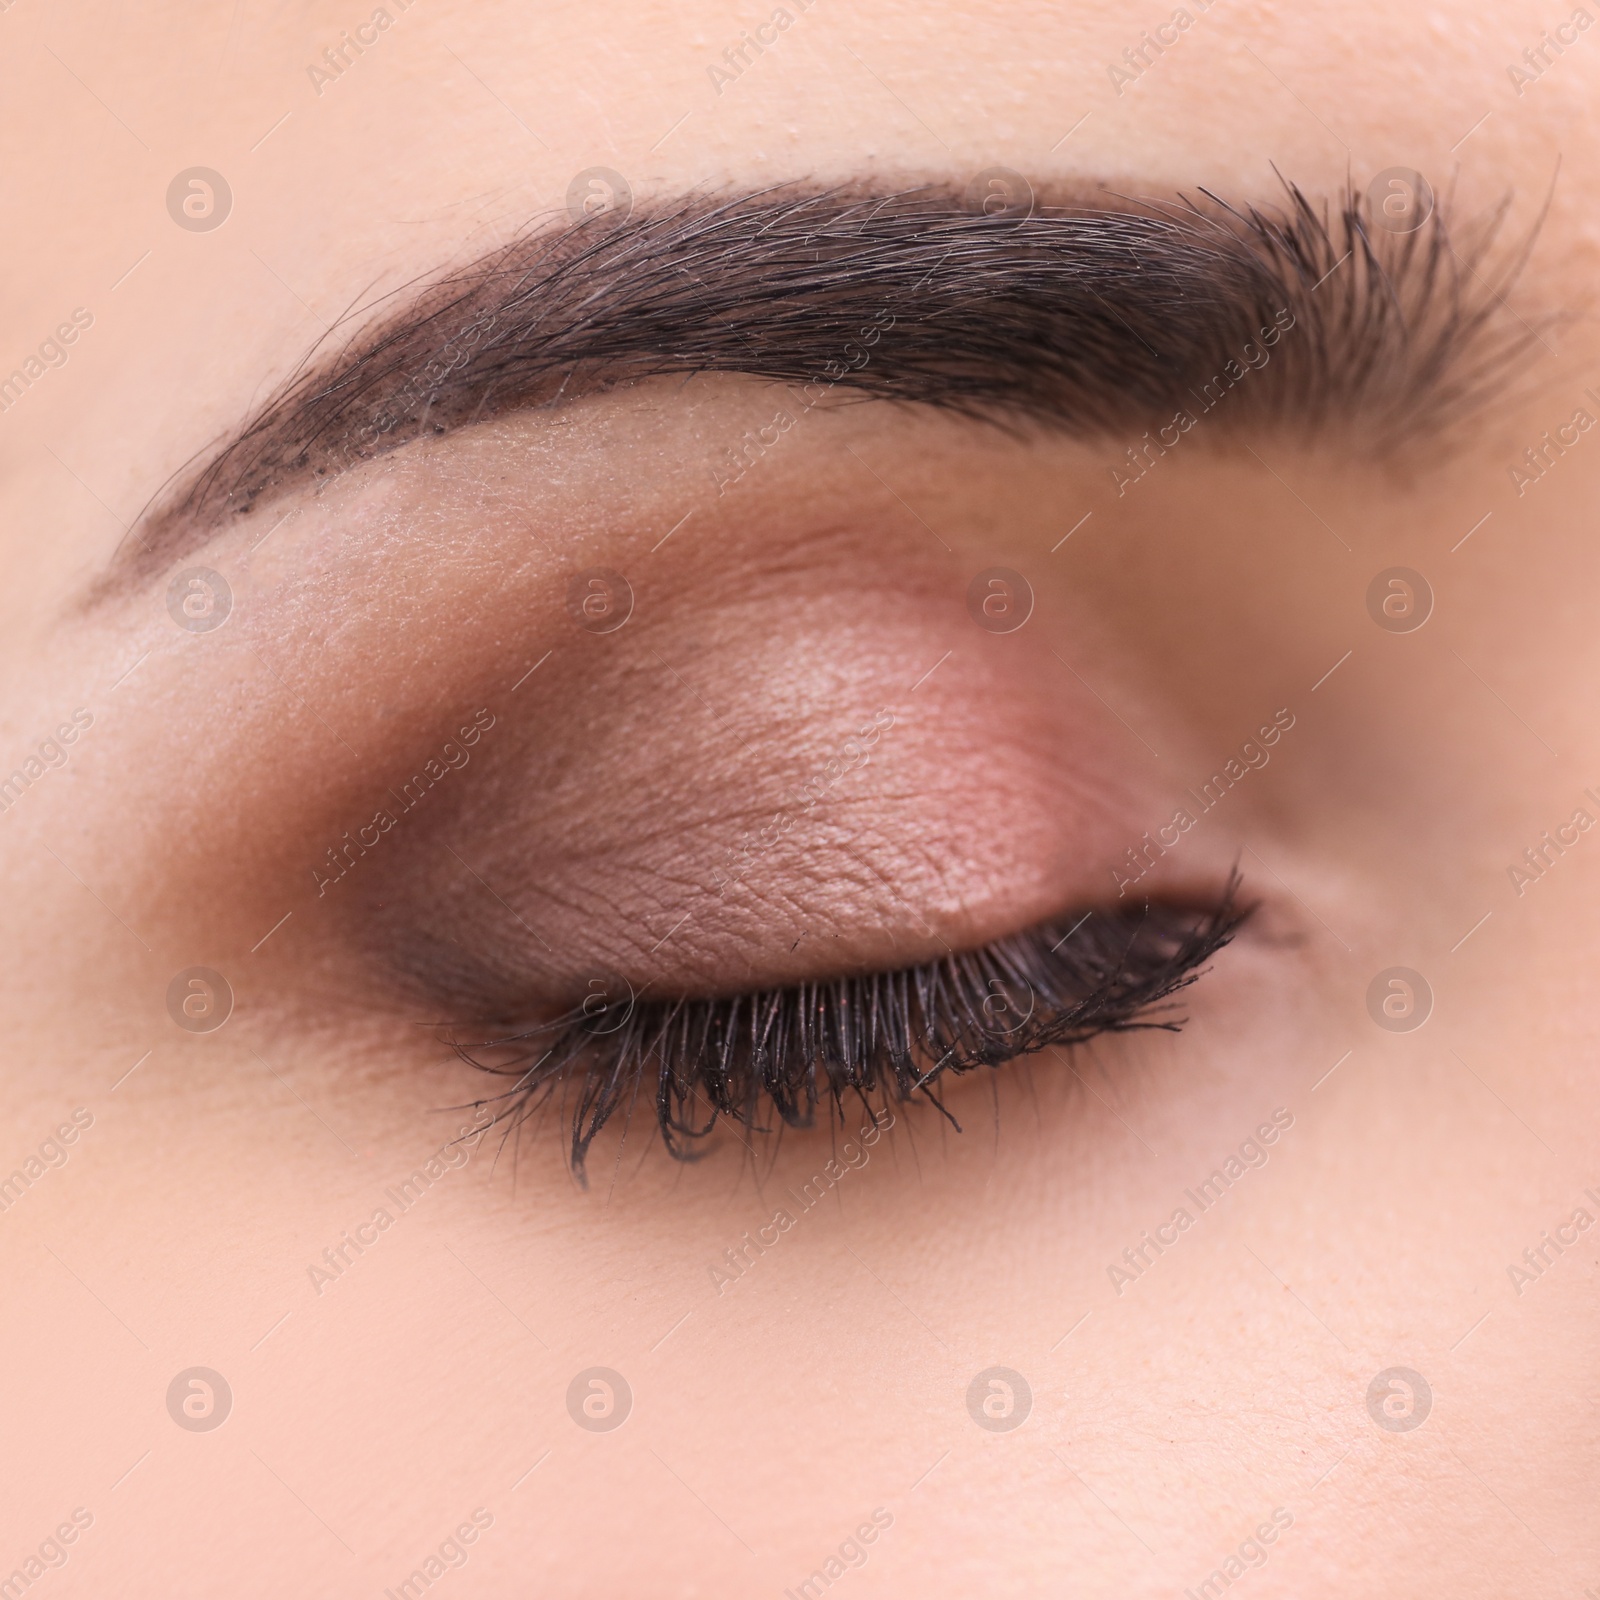 Photo of Woman with beautiful makeup created by professional artist. Focus on eye